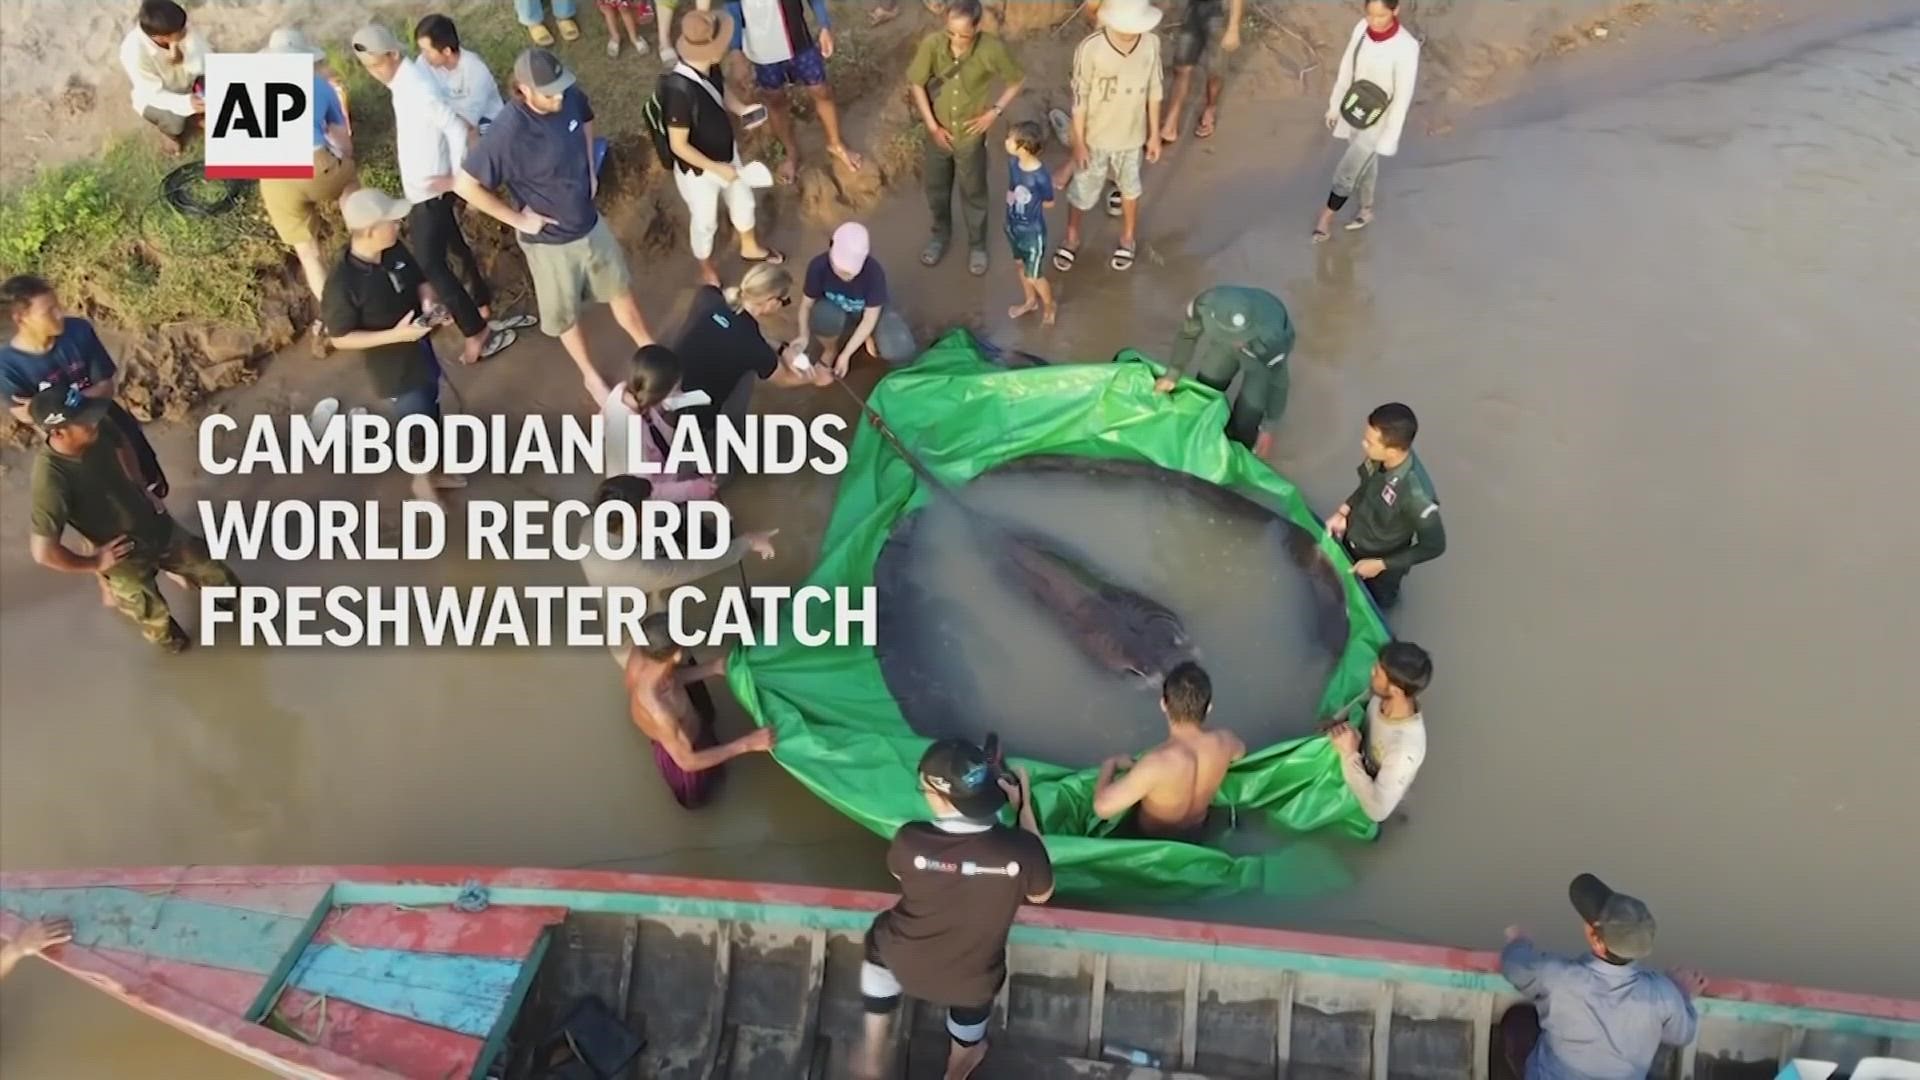 WATCH: Scientists say this 13-foot stingray is the largest freshwater fish caught on record.